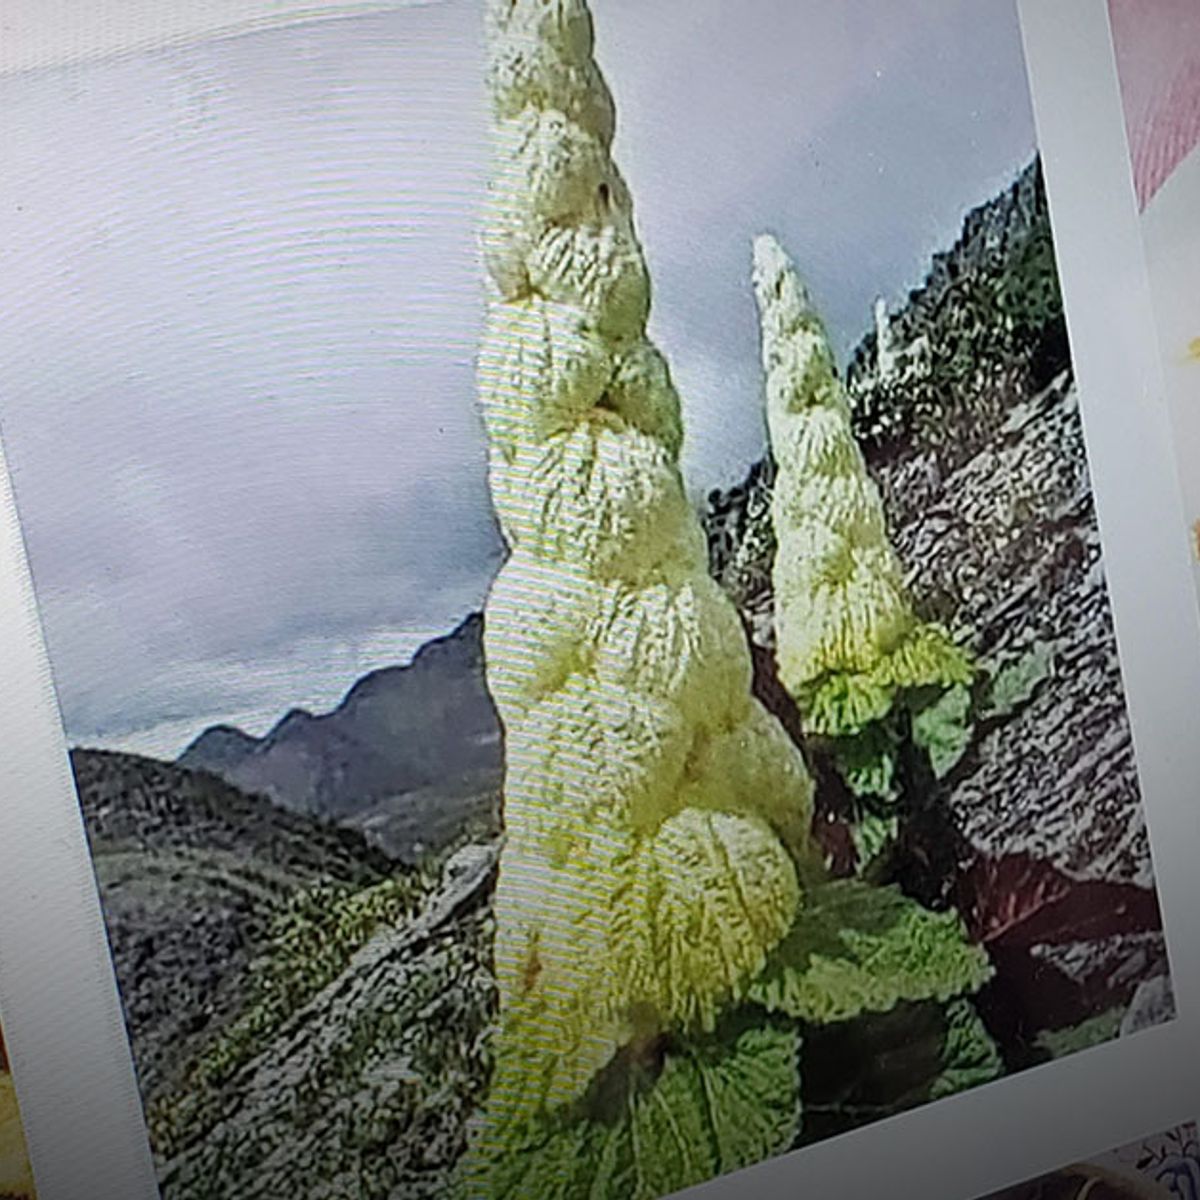 Is This a 'Pagoda Flower' That Only Blooms Once Every 400 Years? |  Snopes.com